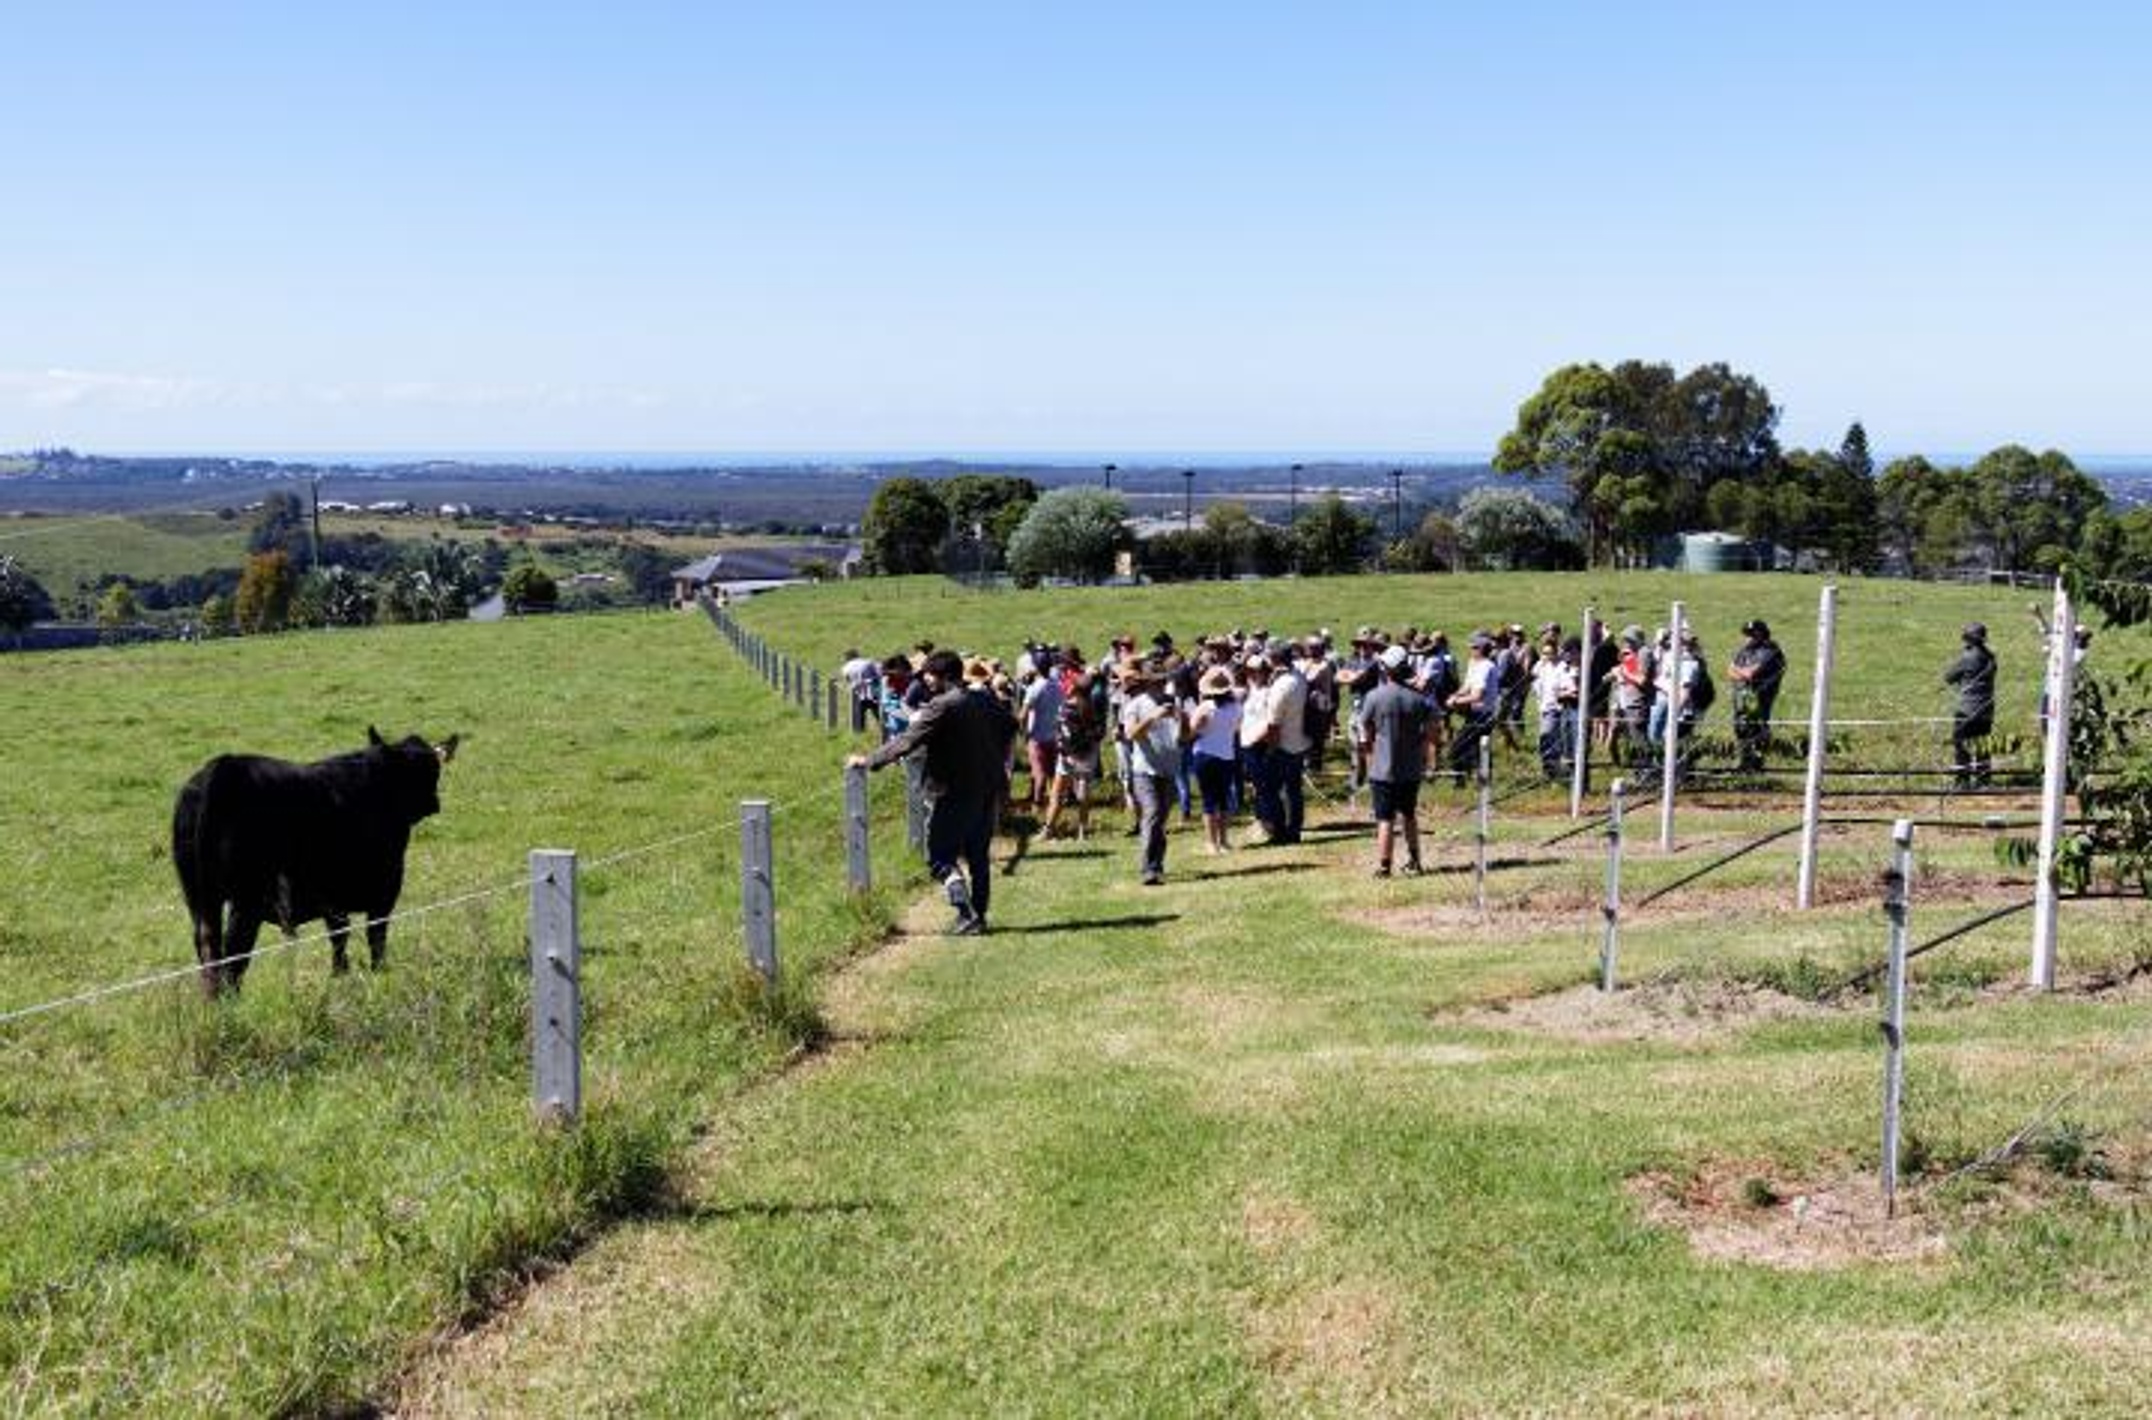 A group of people on a farm, standing near fencing and a black cow